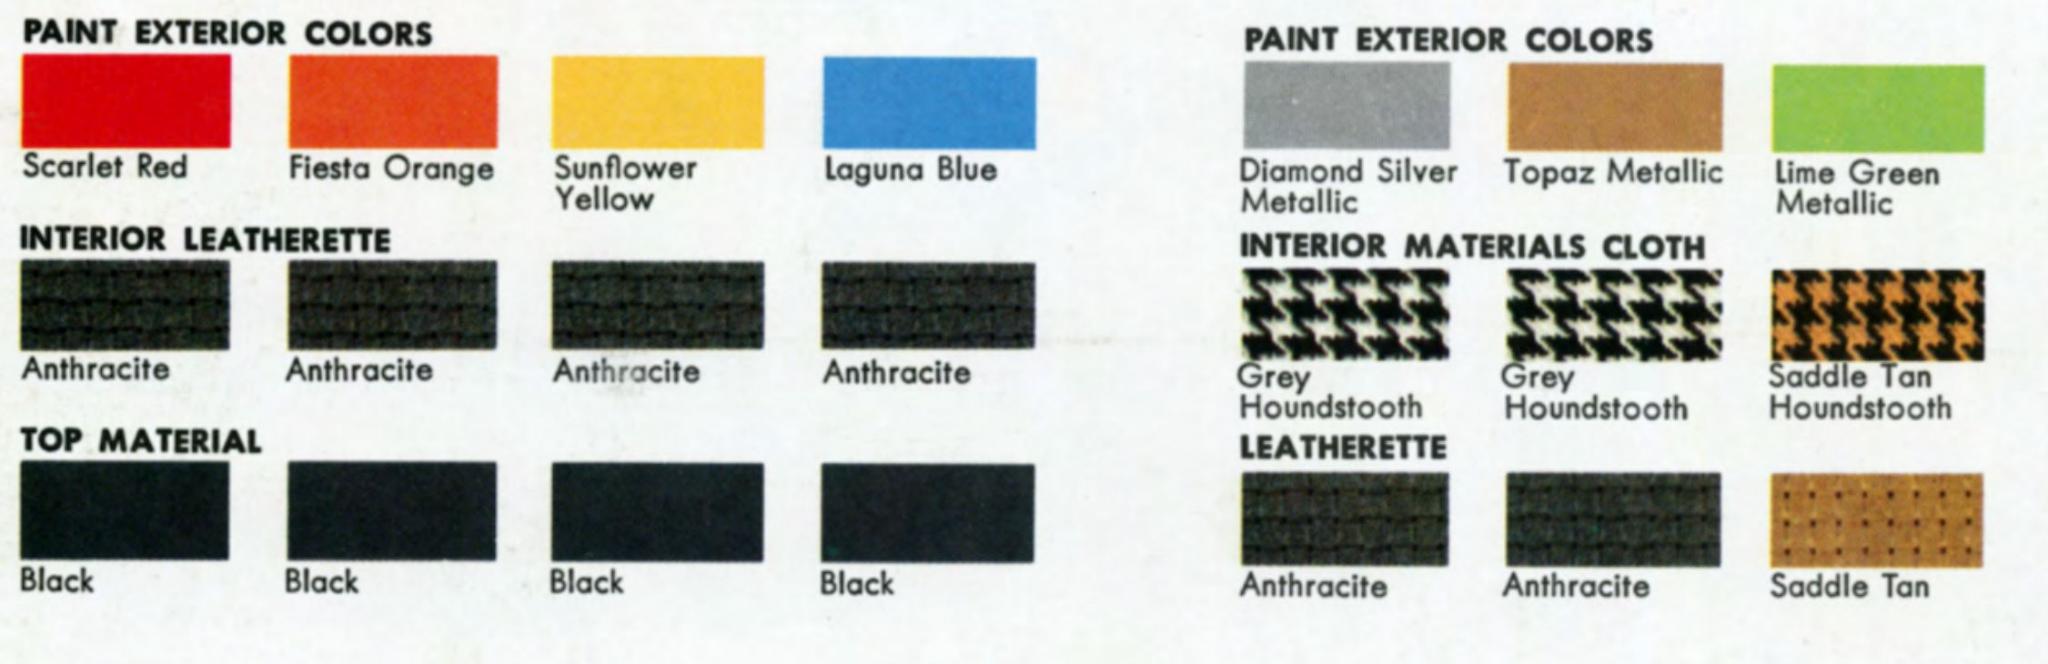 1976 interior and exterior colors for the volkswagen Beatle